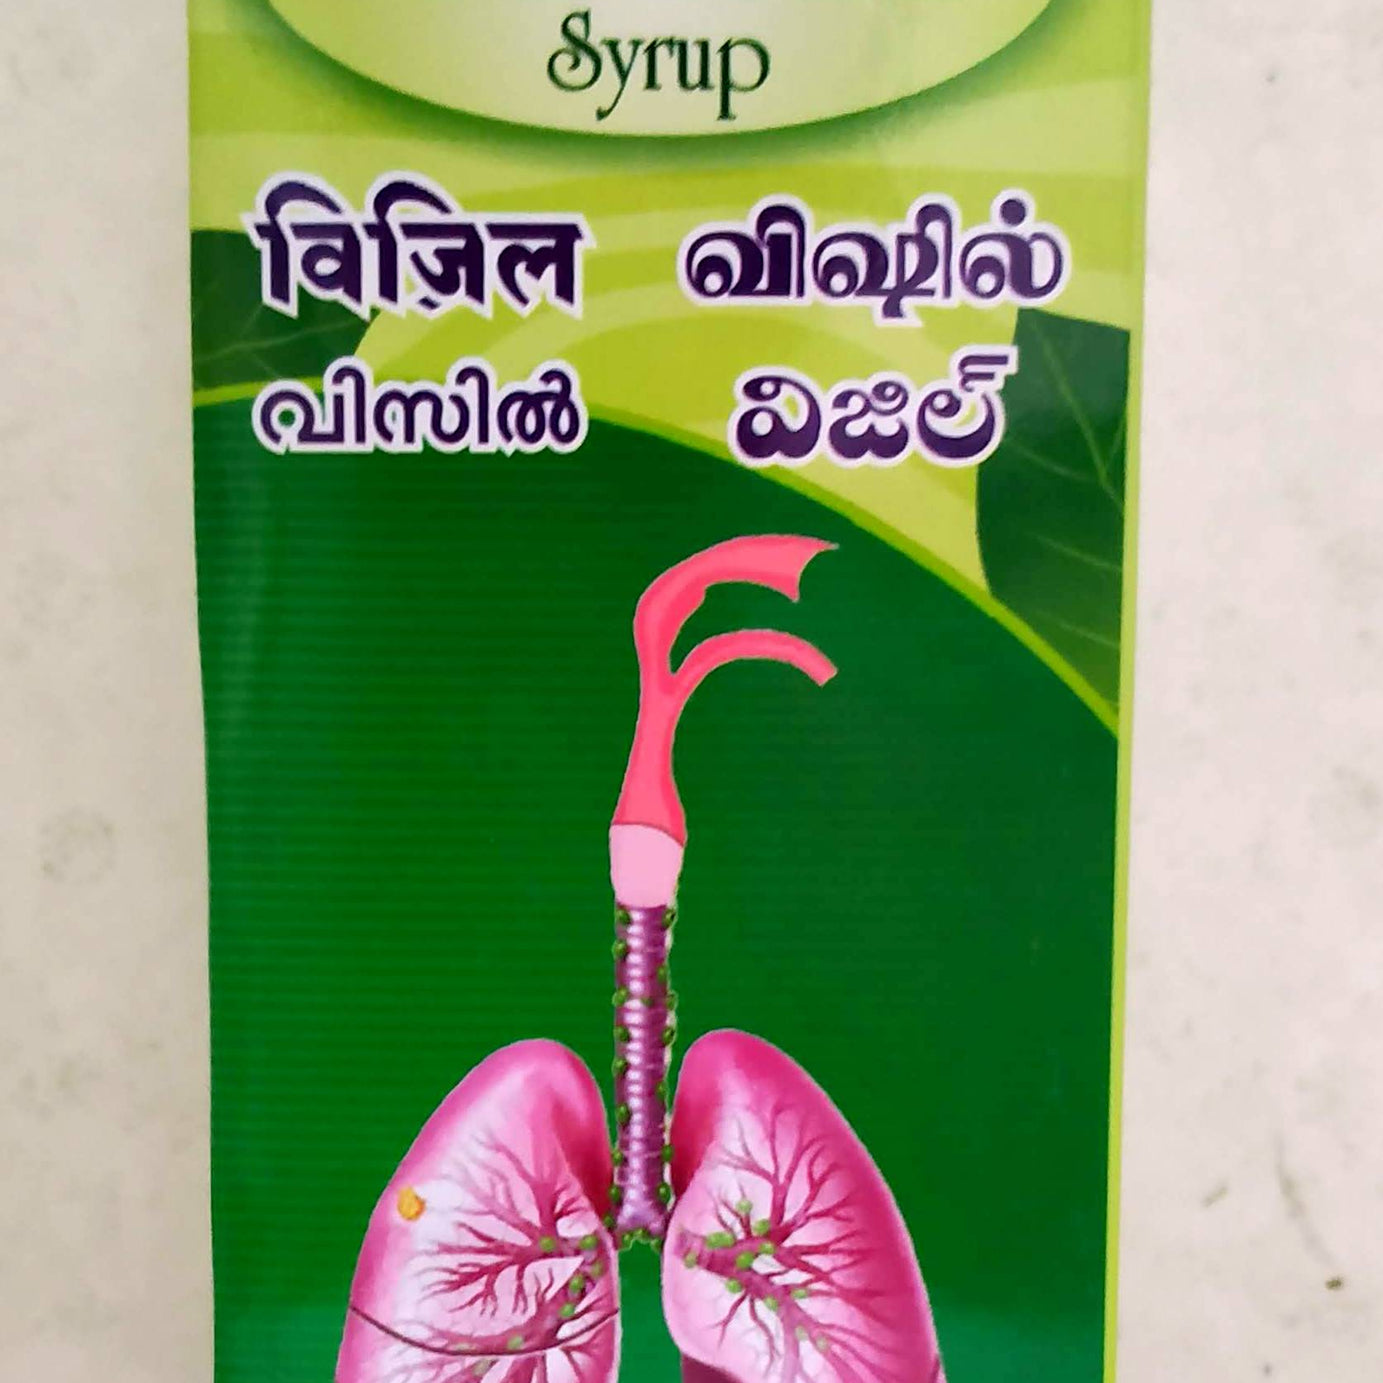 Shop Vizzle Syrup 200ml at price 195.00 from Sanjeevi Online - Ayush Care